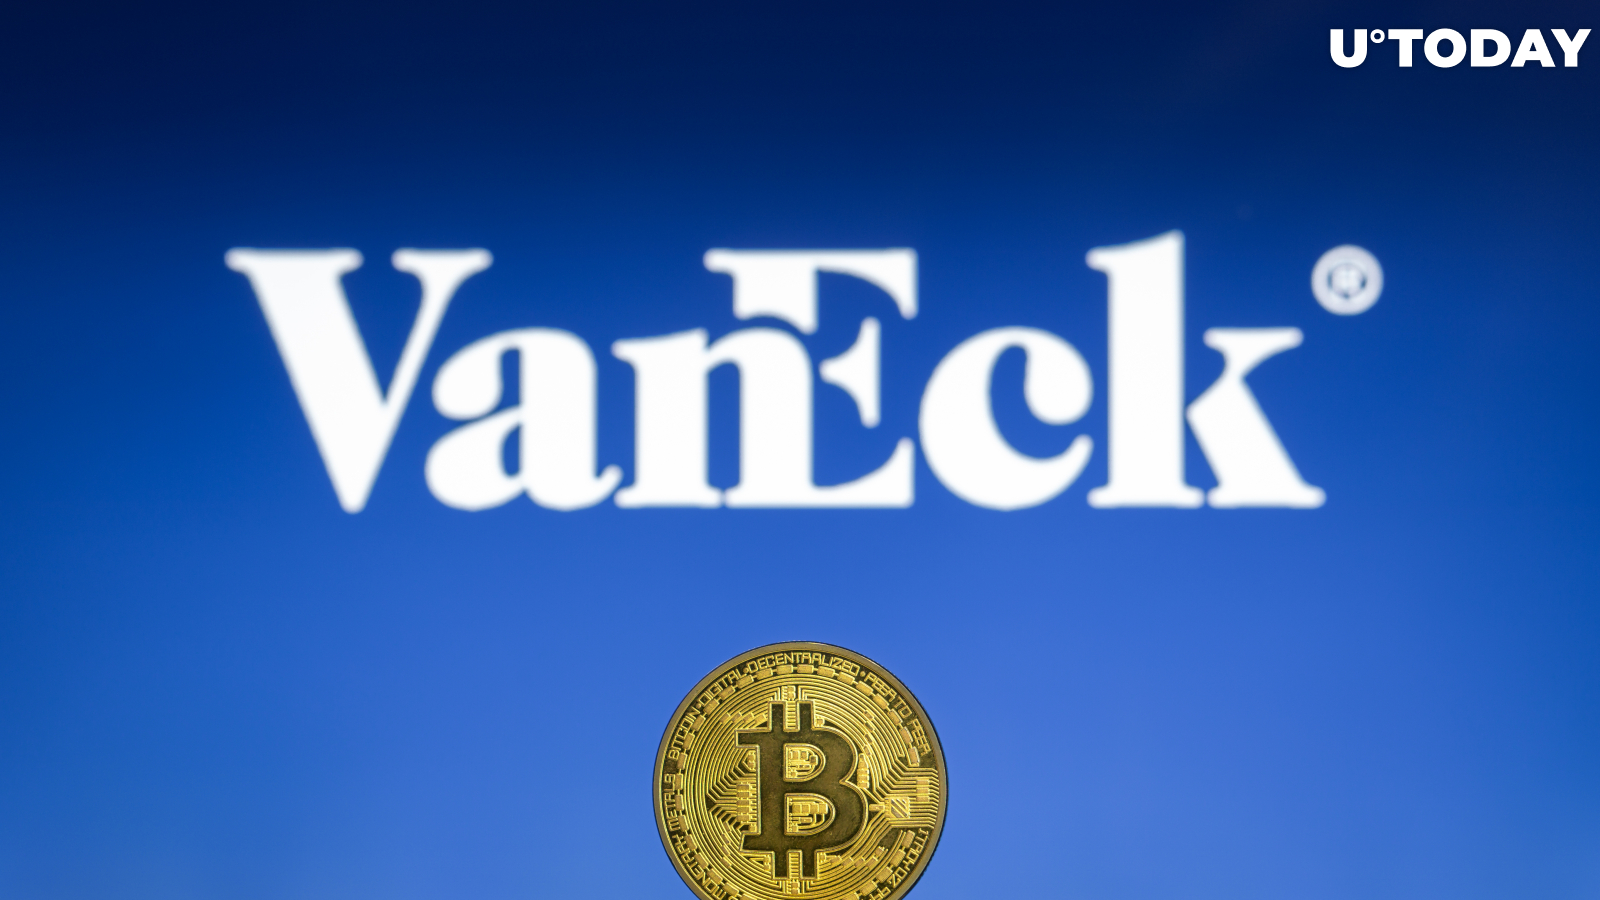 Asset Management Giant VanEck Files for Bitcoin Futures Mutual Fund